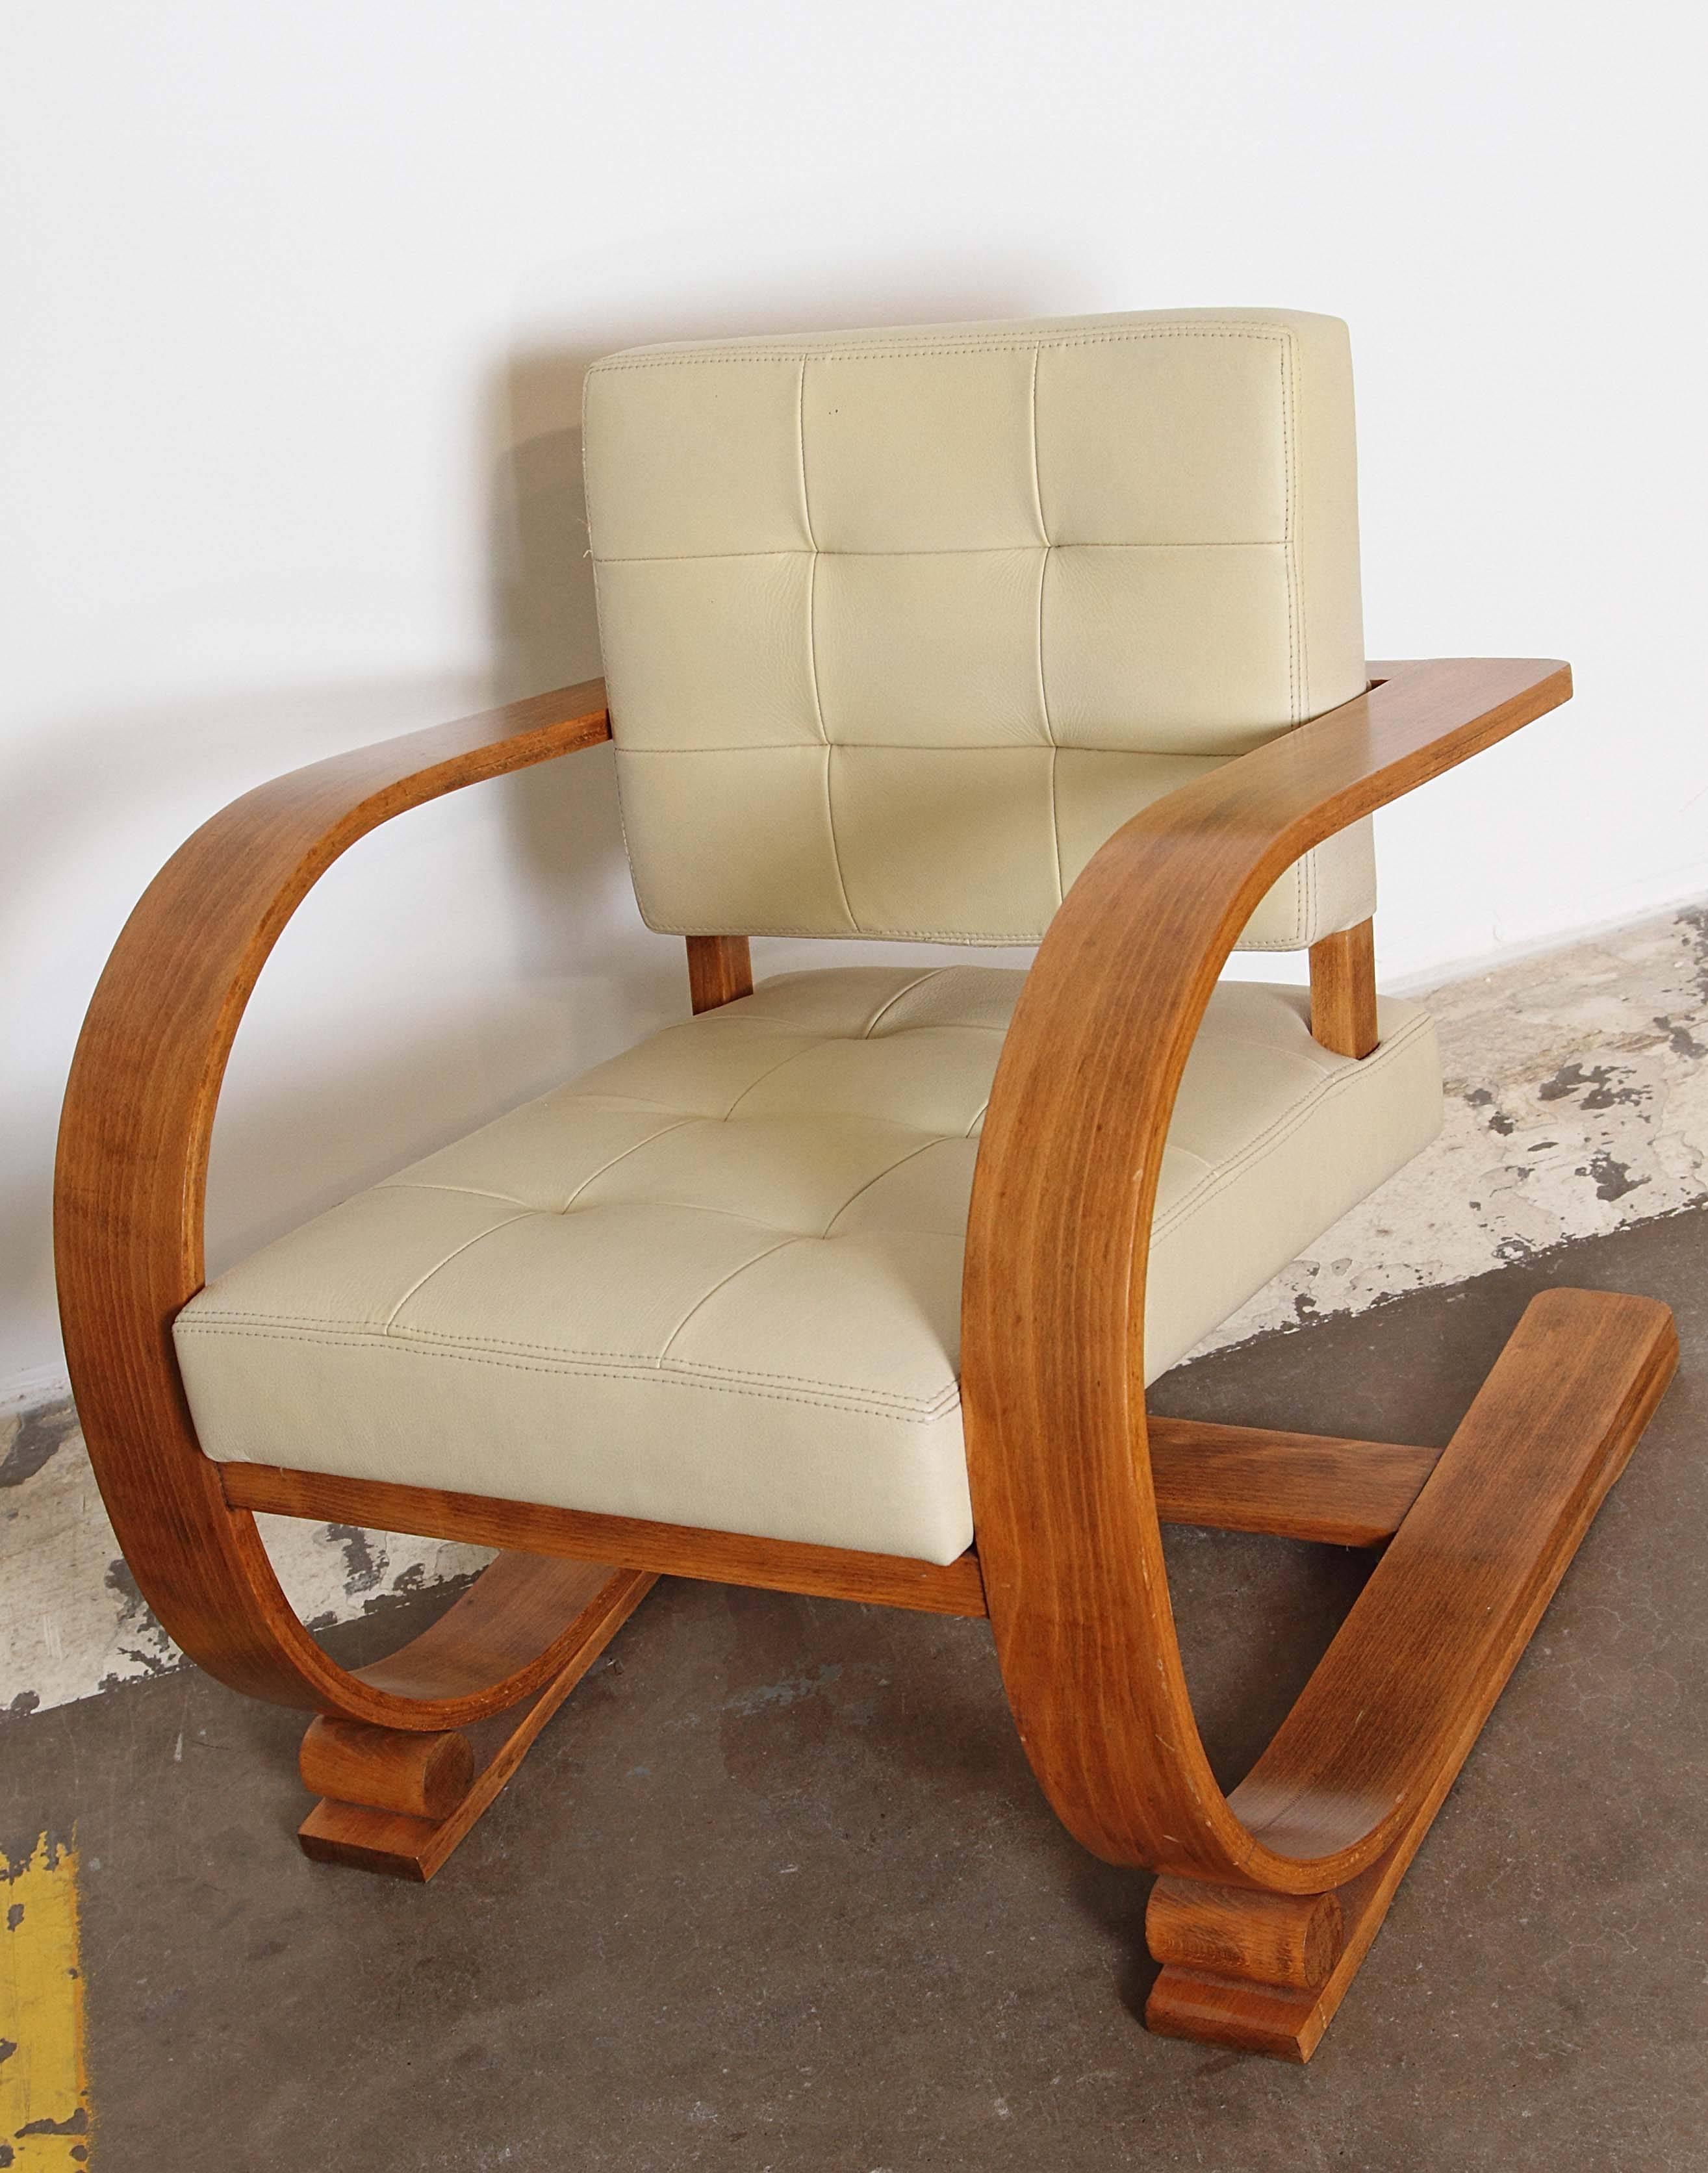 20th Century Streamline Art Deco Cantilevered Bentwood Modernist Lounge Chair